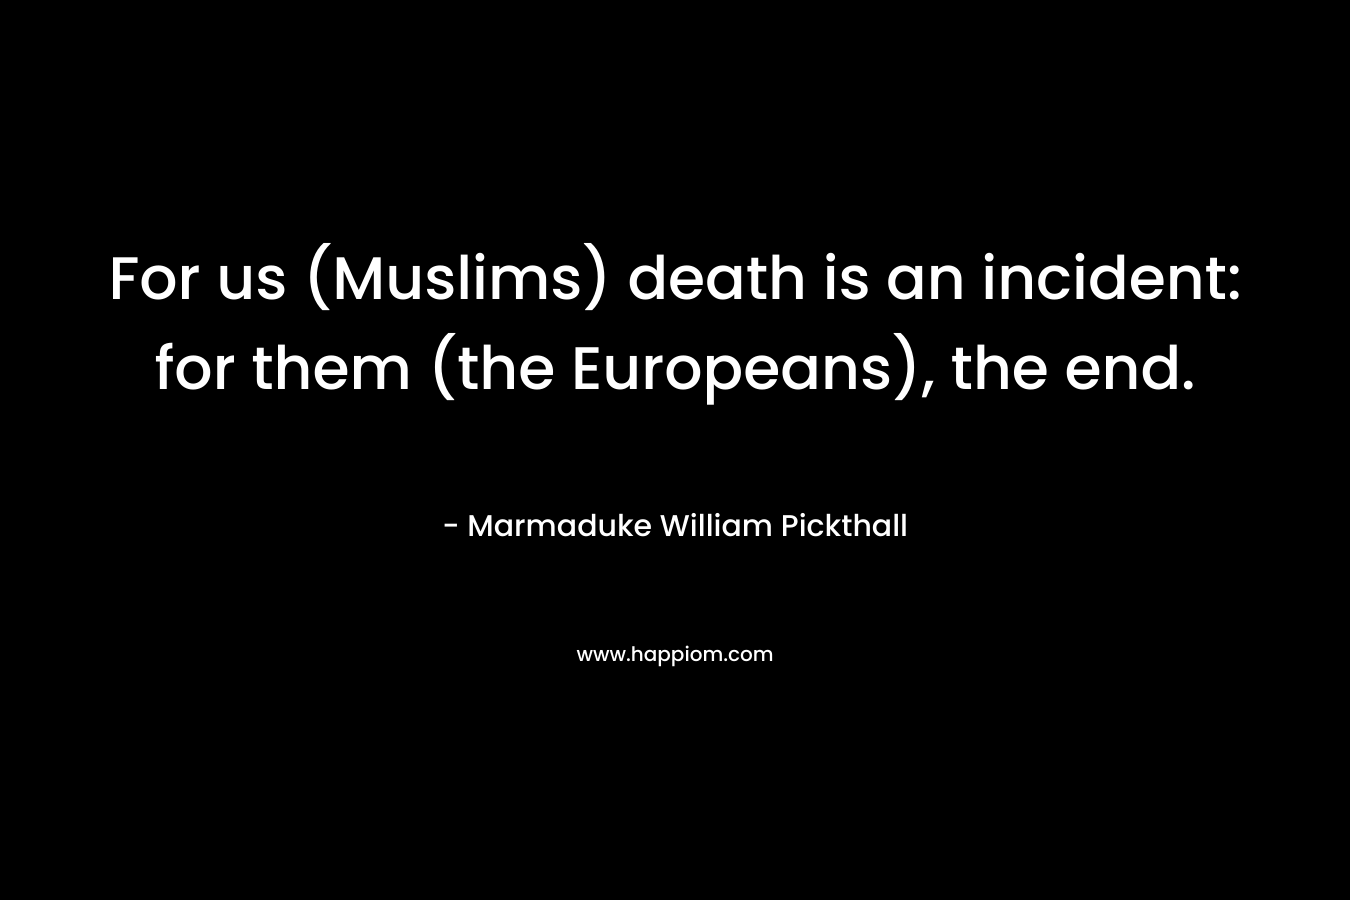 For us (Muslims) death is an incident: for them (the Europeans), the end. – Marmaduke William Pickthall